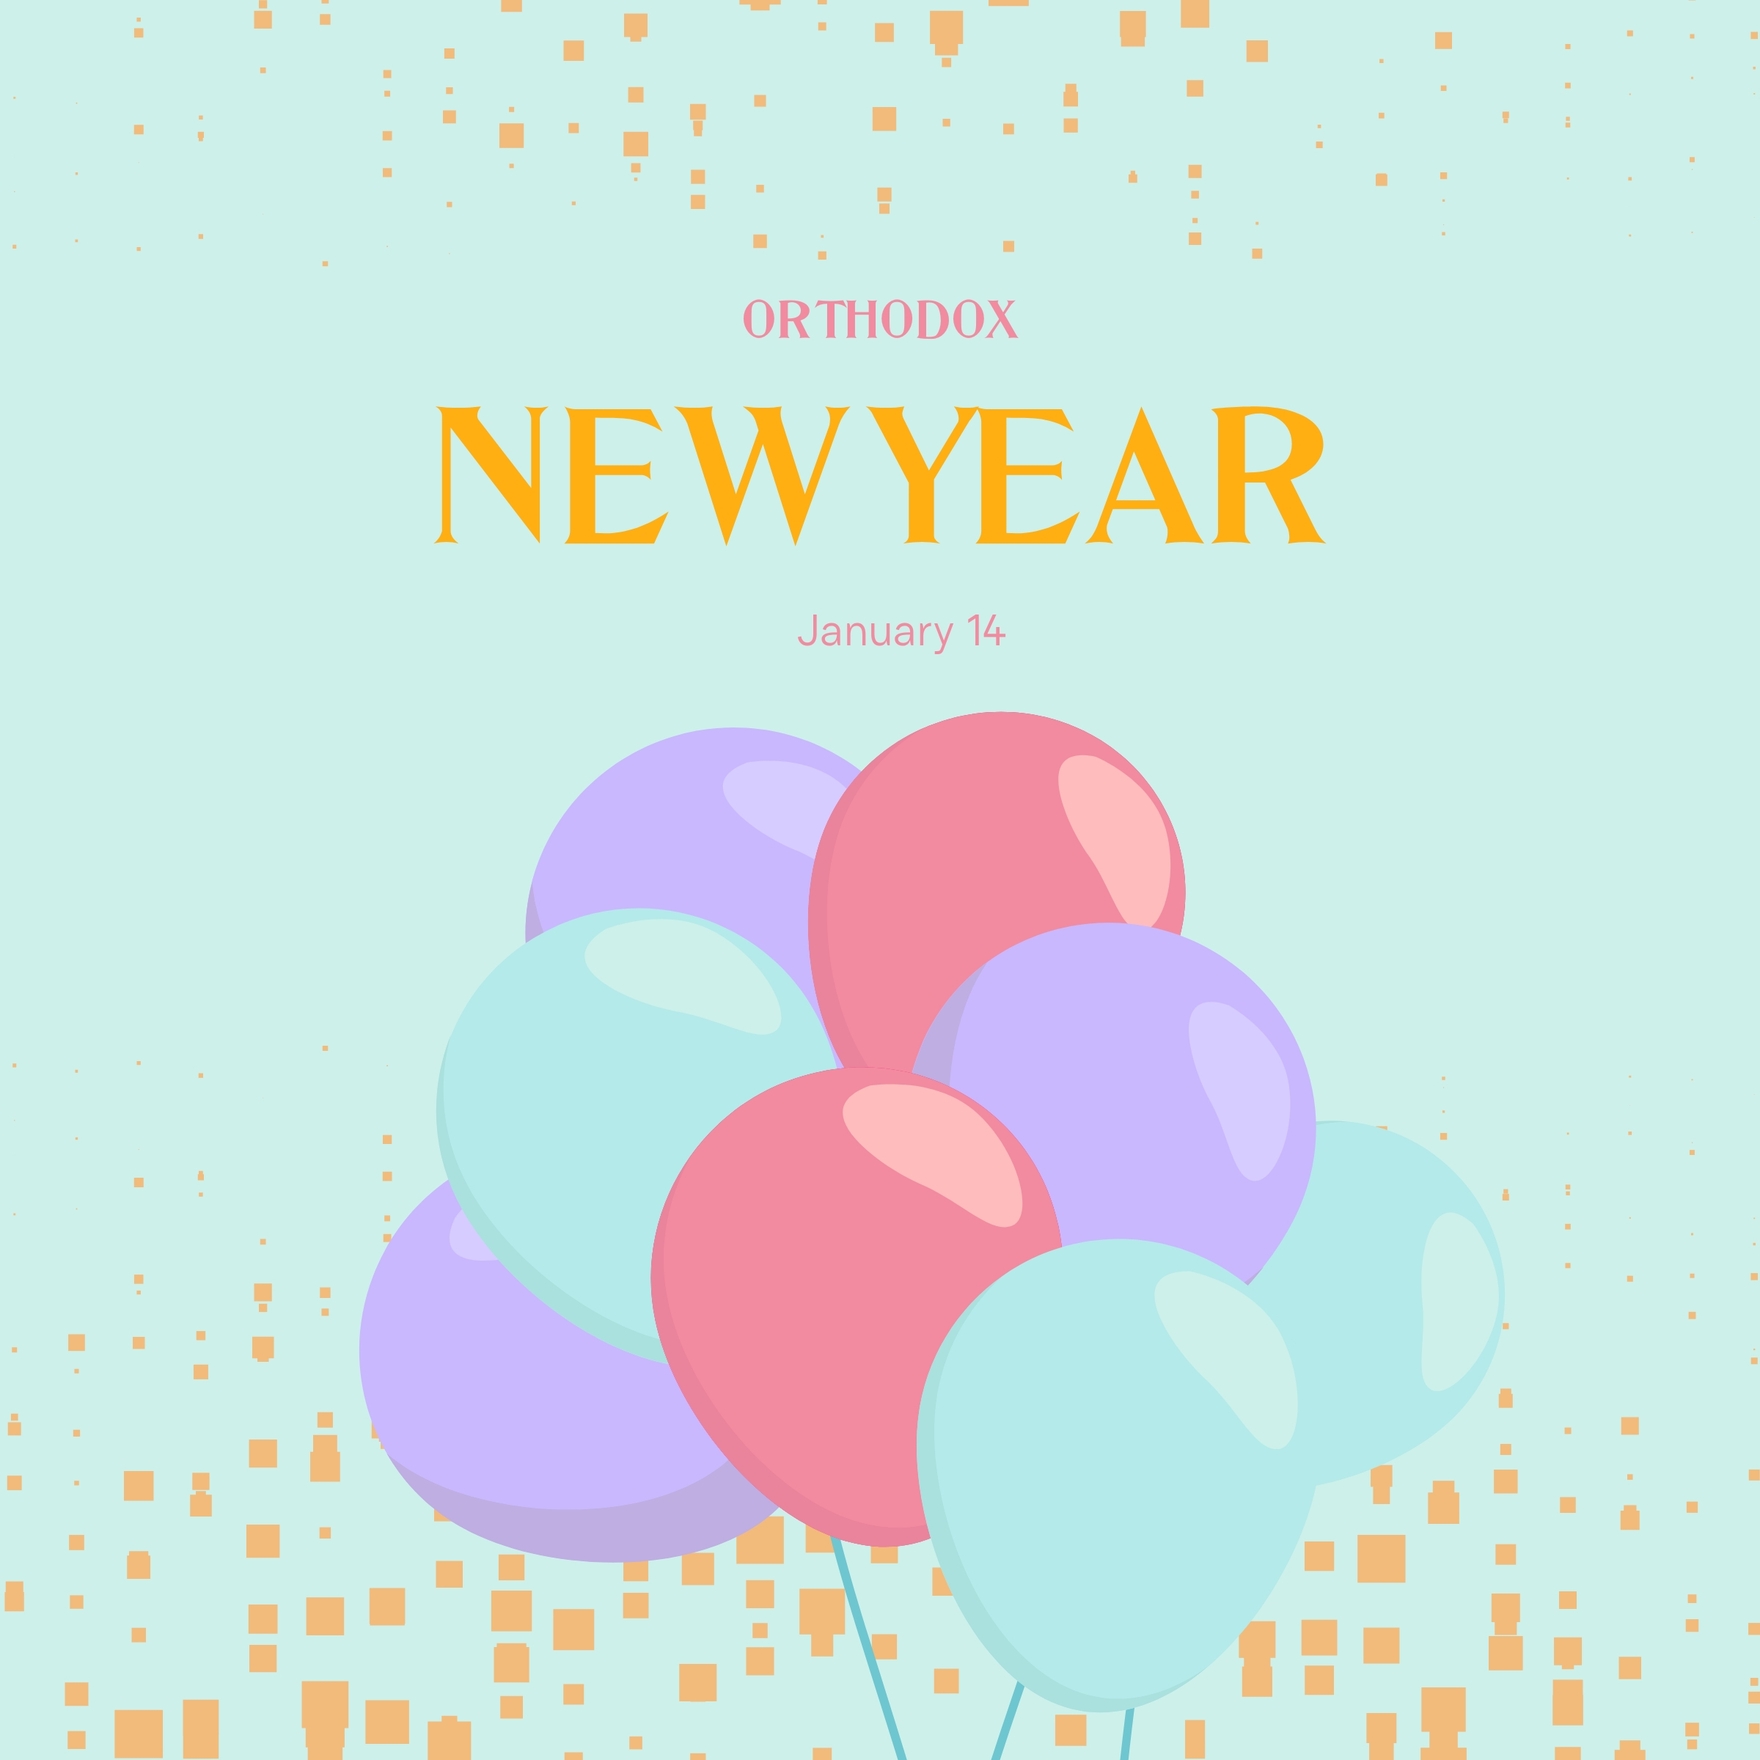 Free Orthodox New Year WhatsApp Post in Illustrator, PSD, EPS, SVG, PNG, JPEG